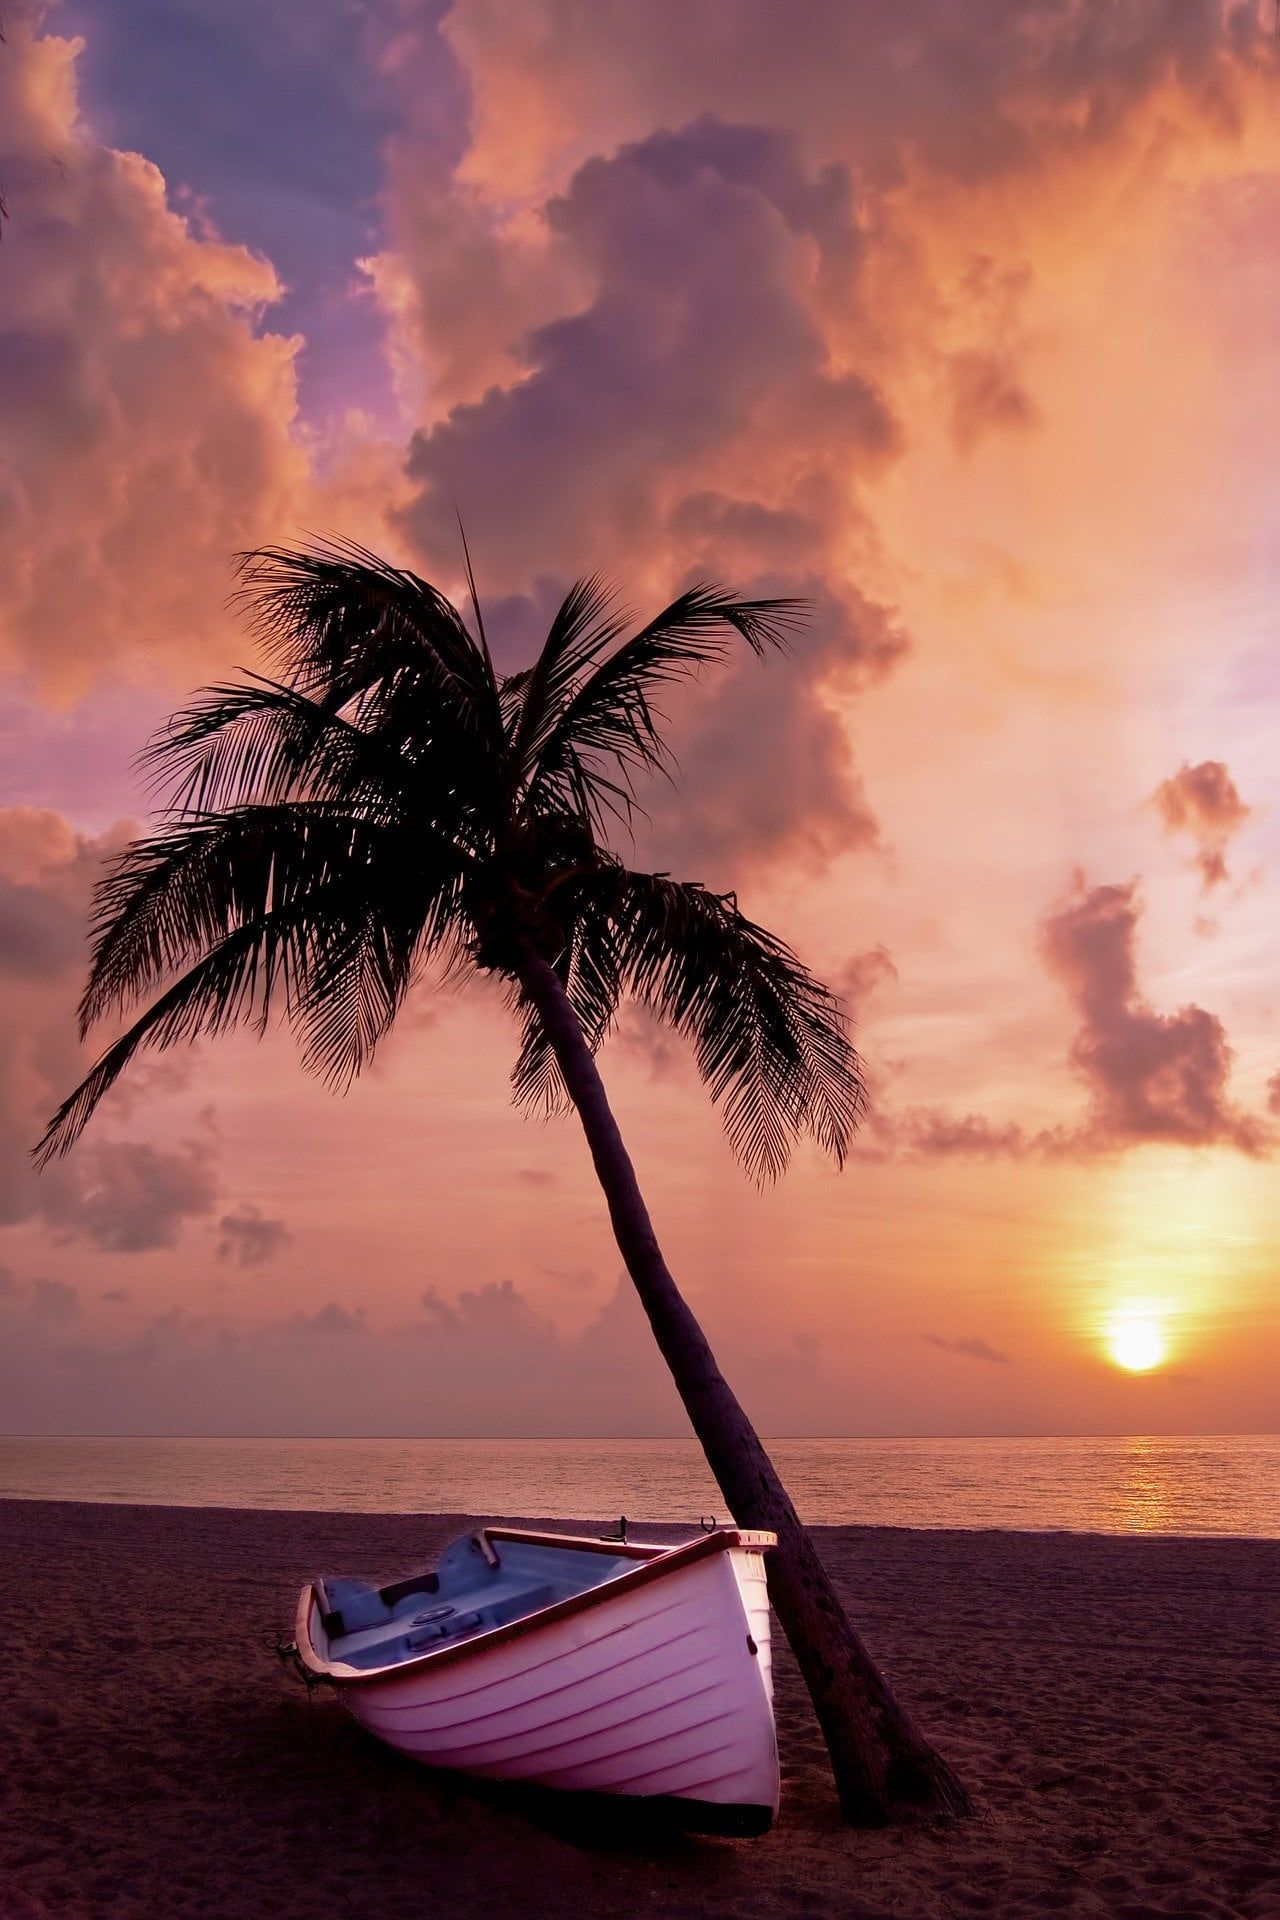 A boat sitting on the beach with palm tree - Tropical